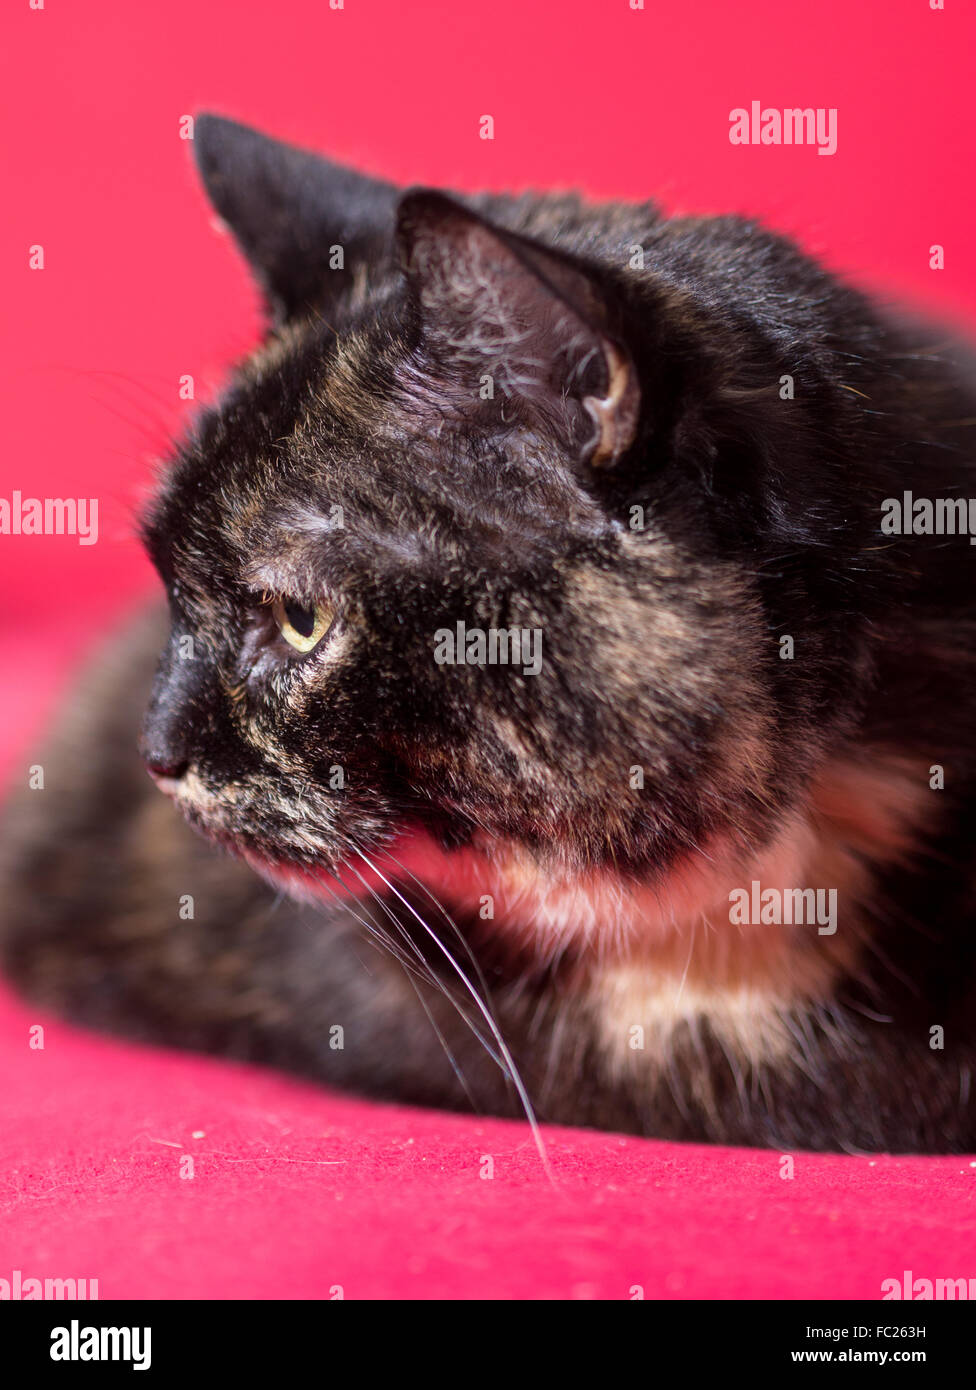 A cat watches one's activities relaxed Stock Photo